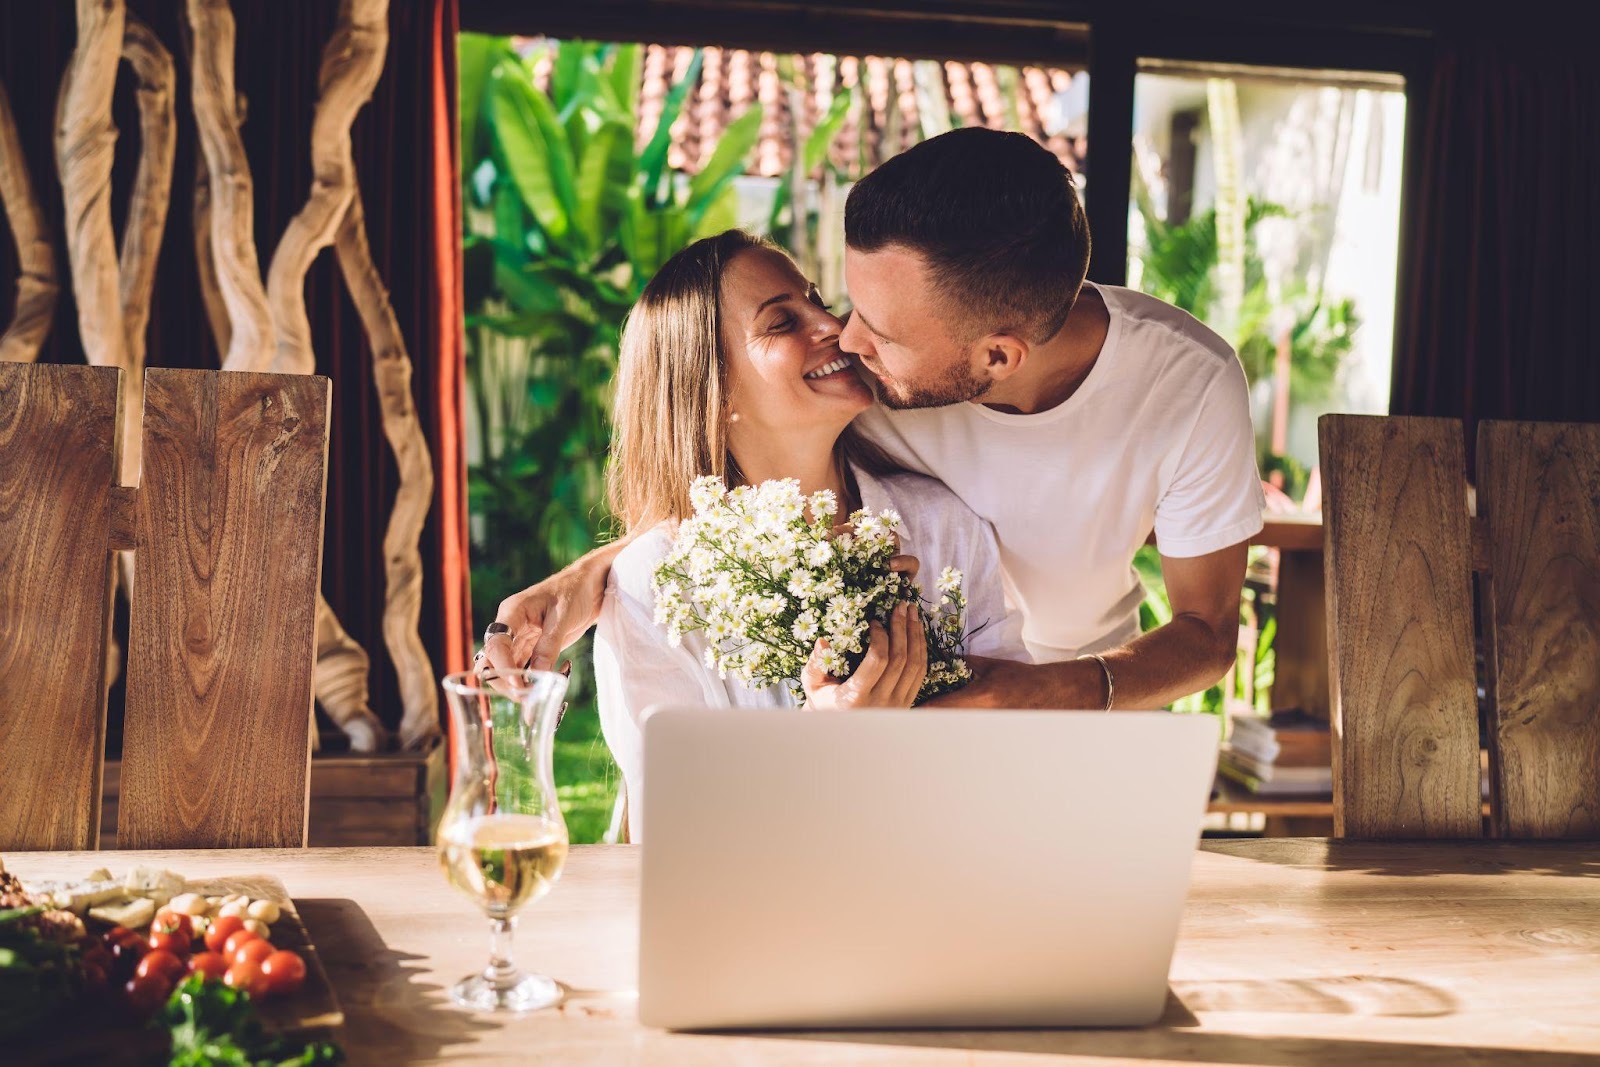 Celebrating Everlasting Love: A Guide to Anniversary Gifts